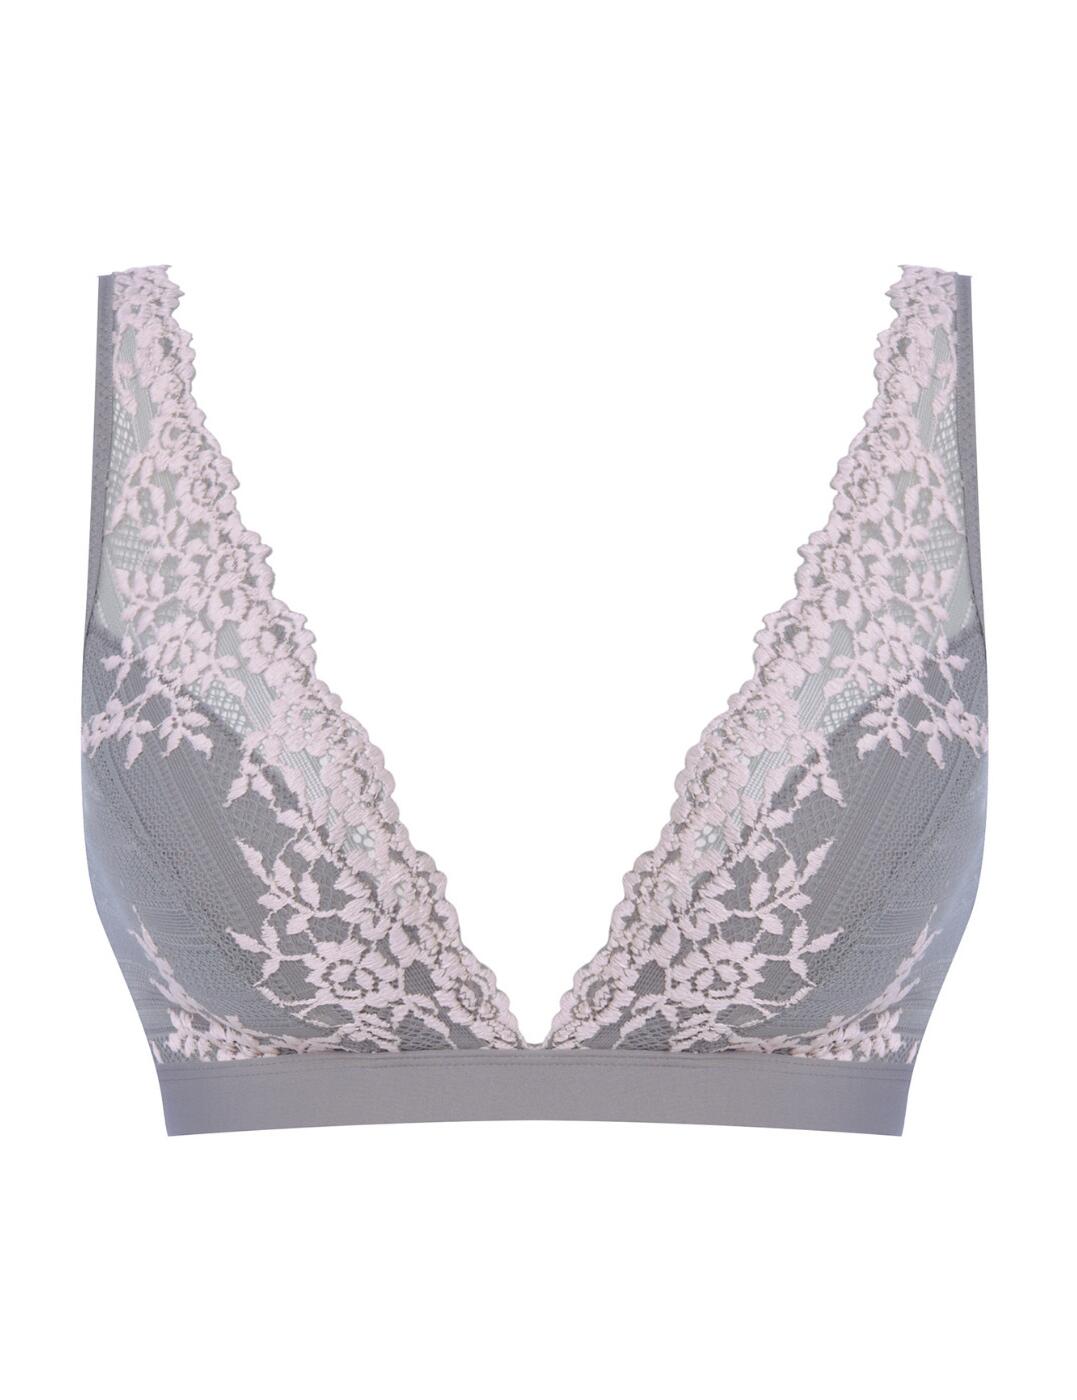 Embrace Lace Black Soft Cup Bra from Wacoal